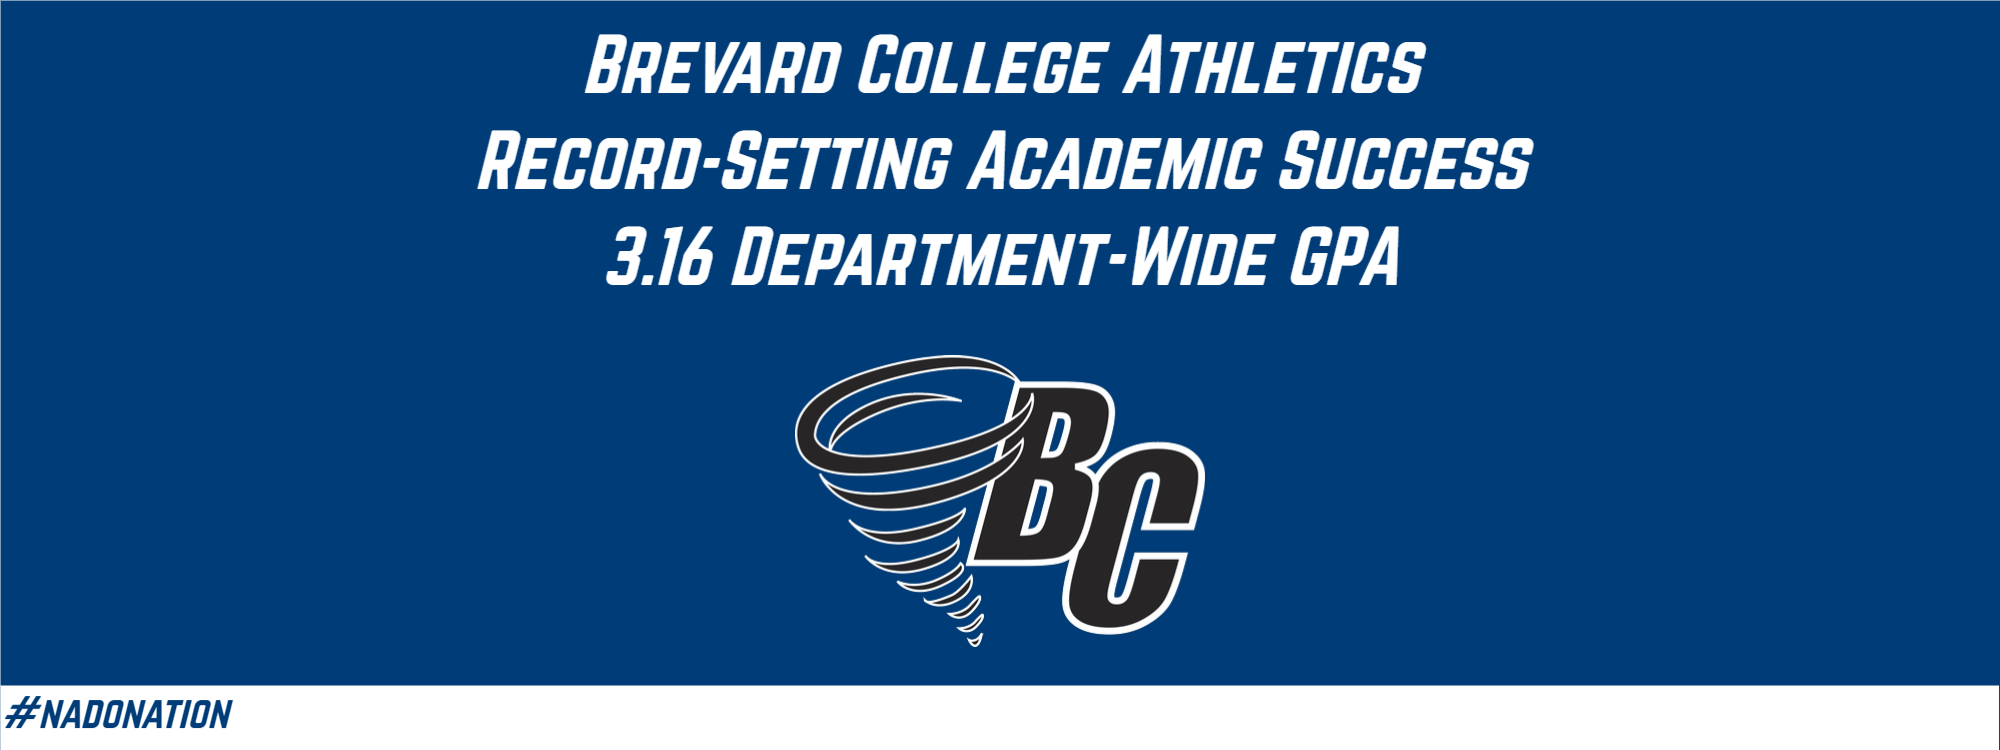 BC Student-Athletes Achieve Record-Setting Classroom Success in Fall 2020